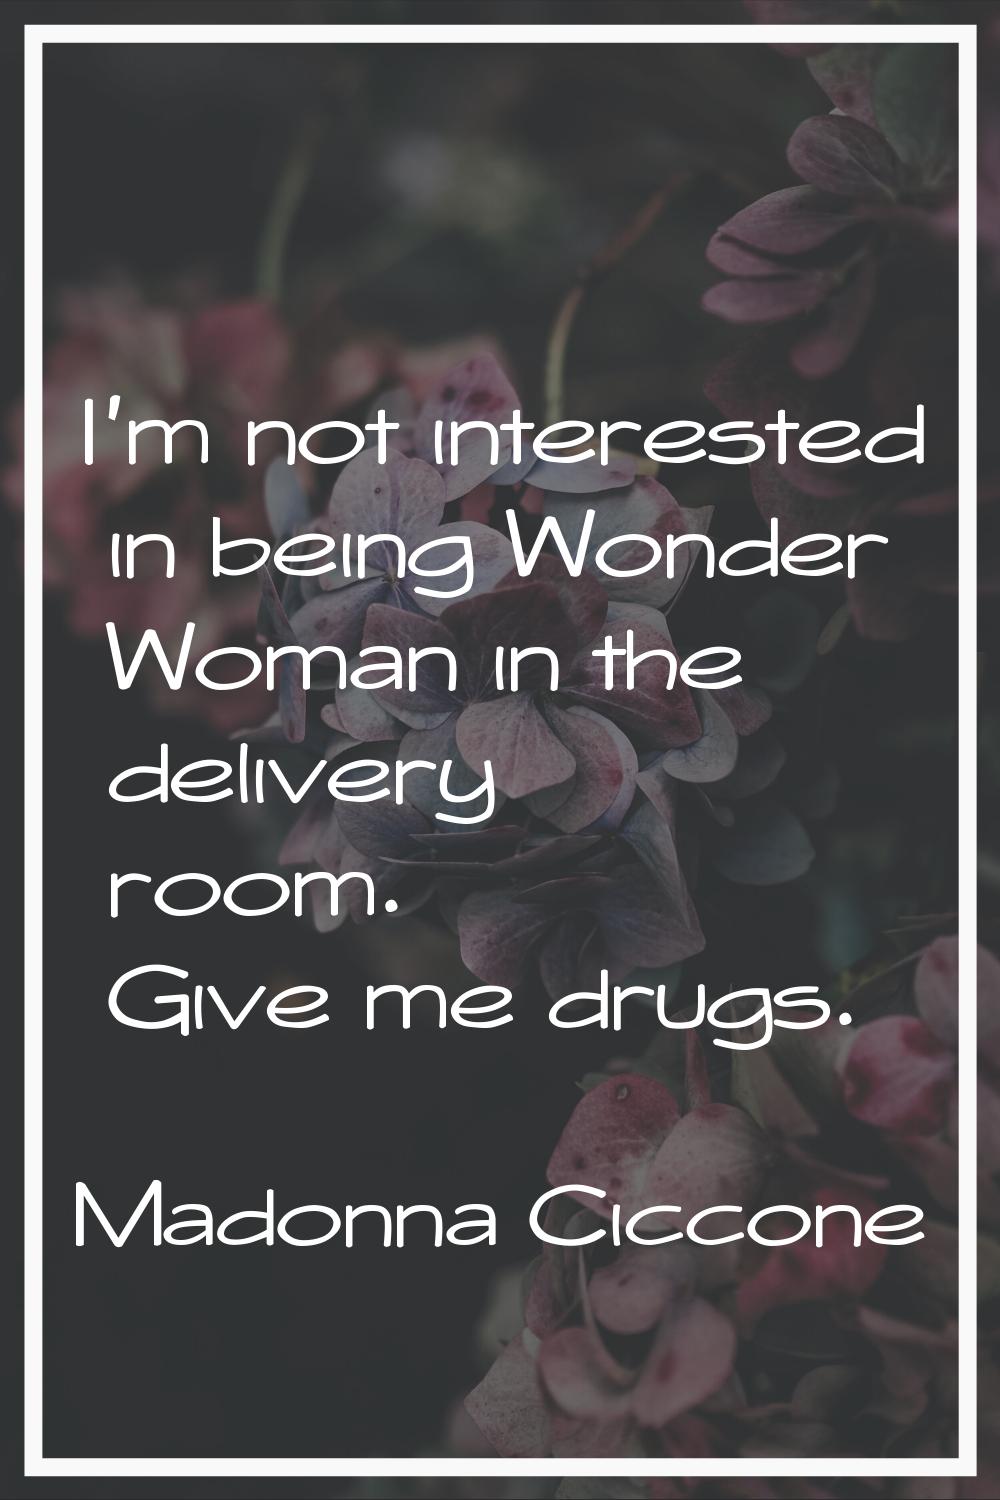 I'm not interested in being Wonder Woman in the delivery room. Give me drugs.